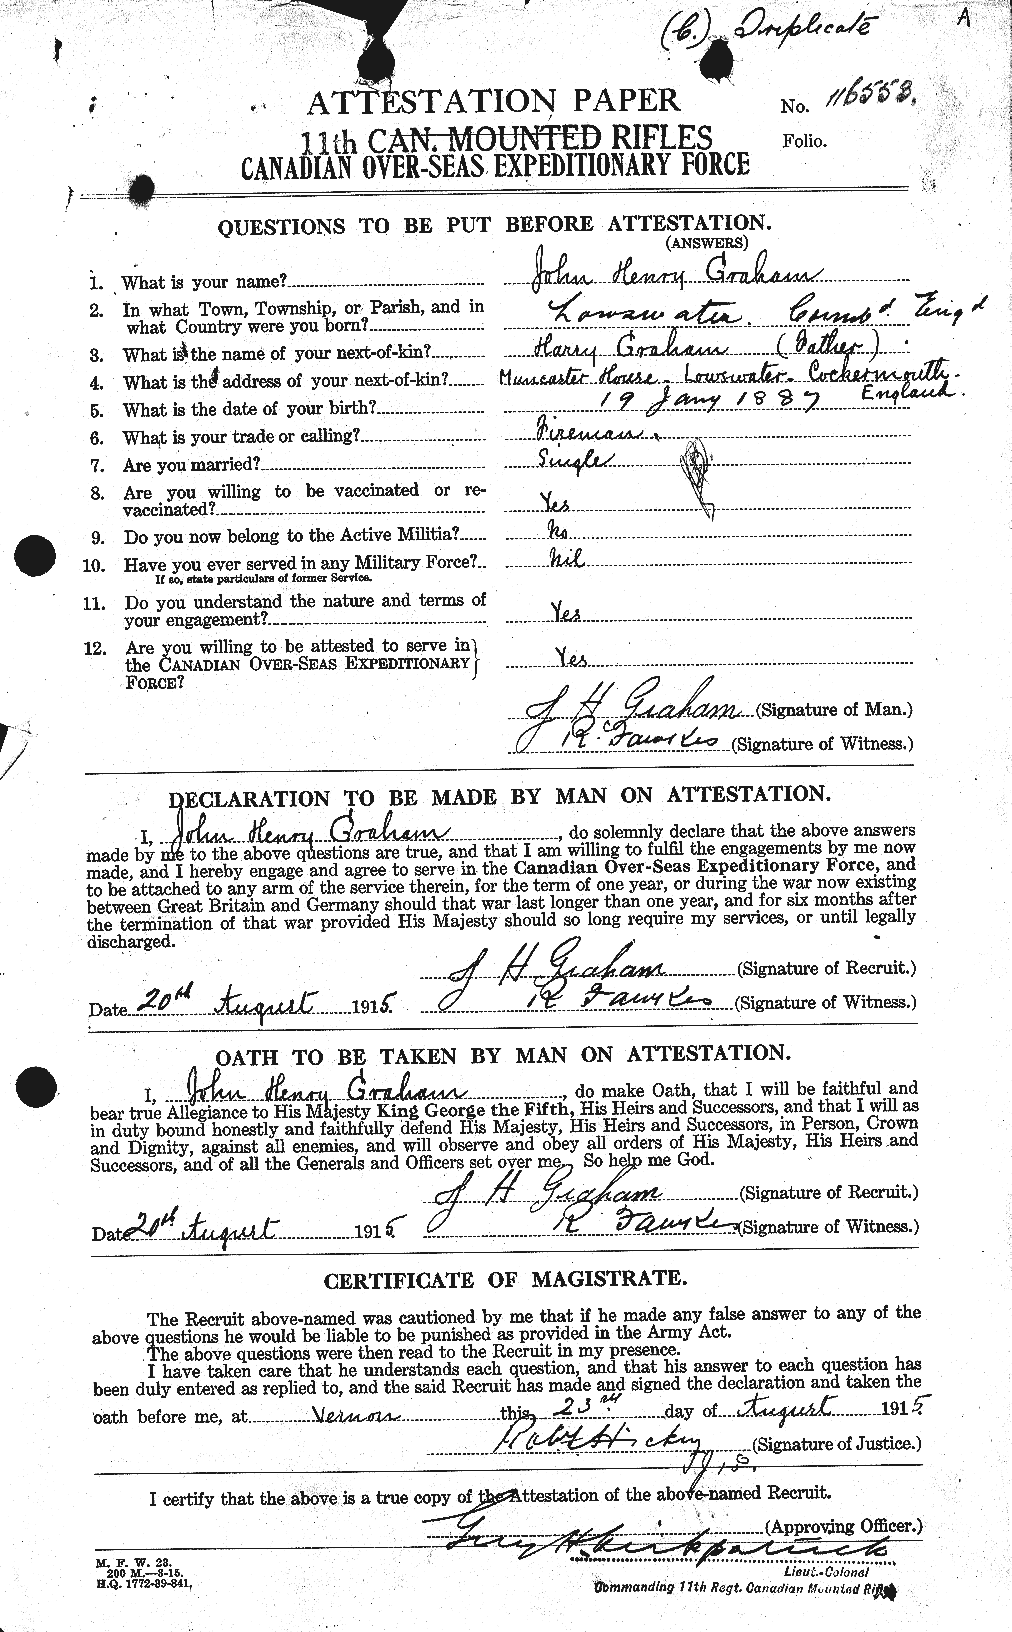 Personnel Records of the First World War - CEF 359180a